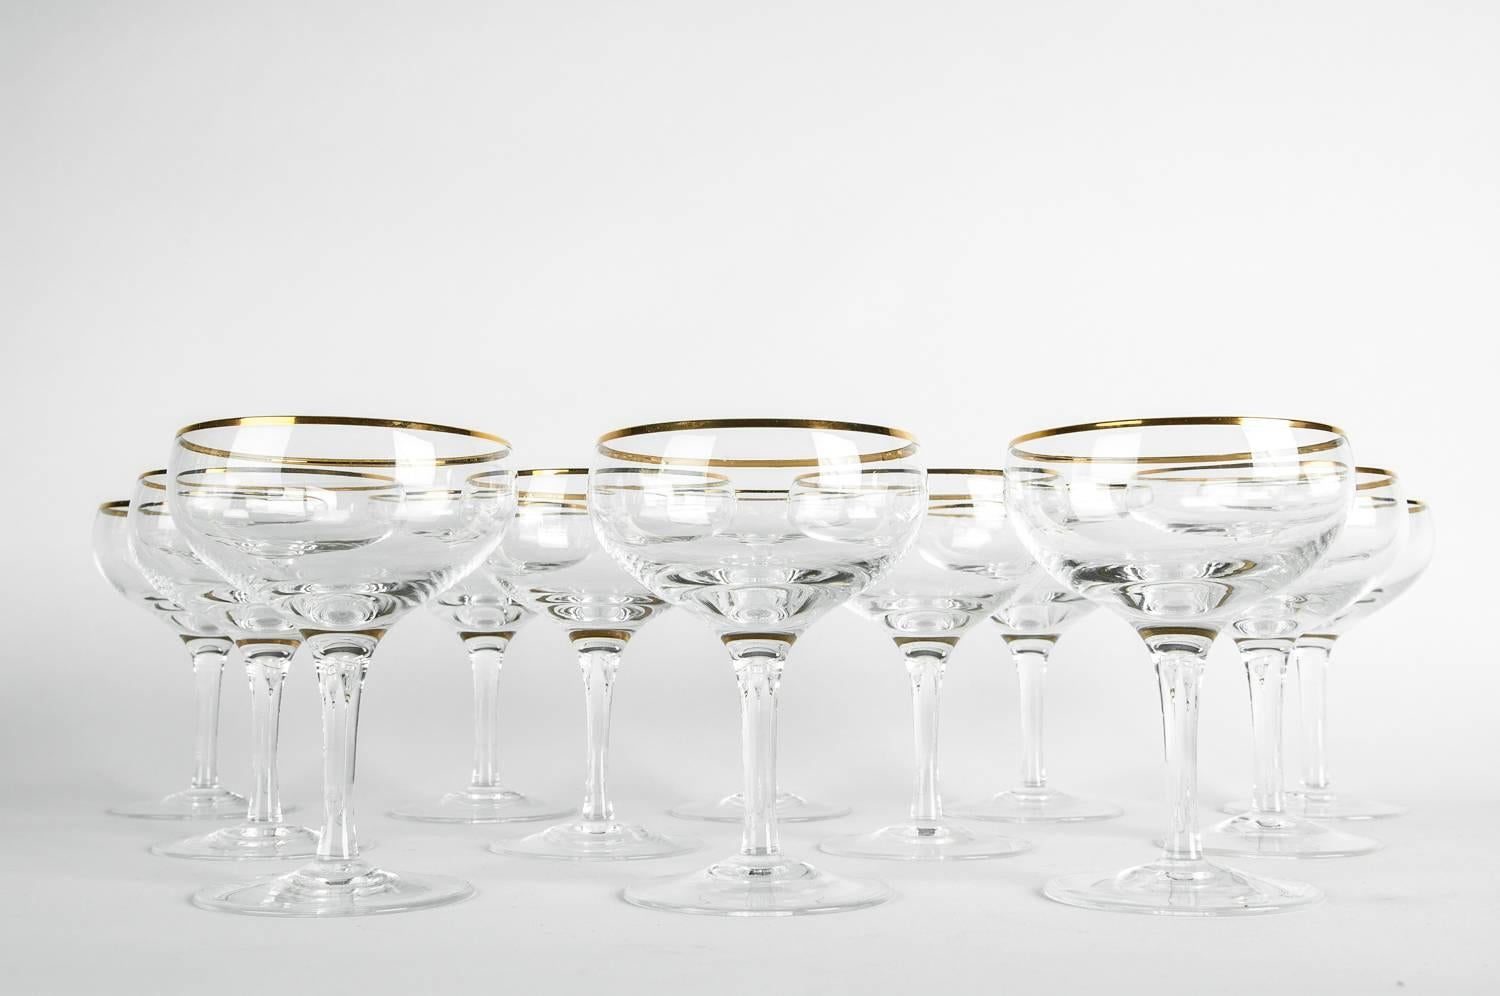 French Vintage Crystal Champagne Coupe Glassware Set 12 Pieces .